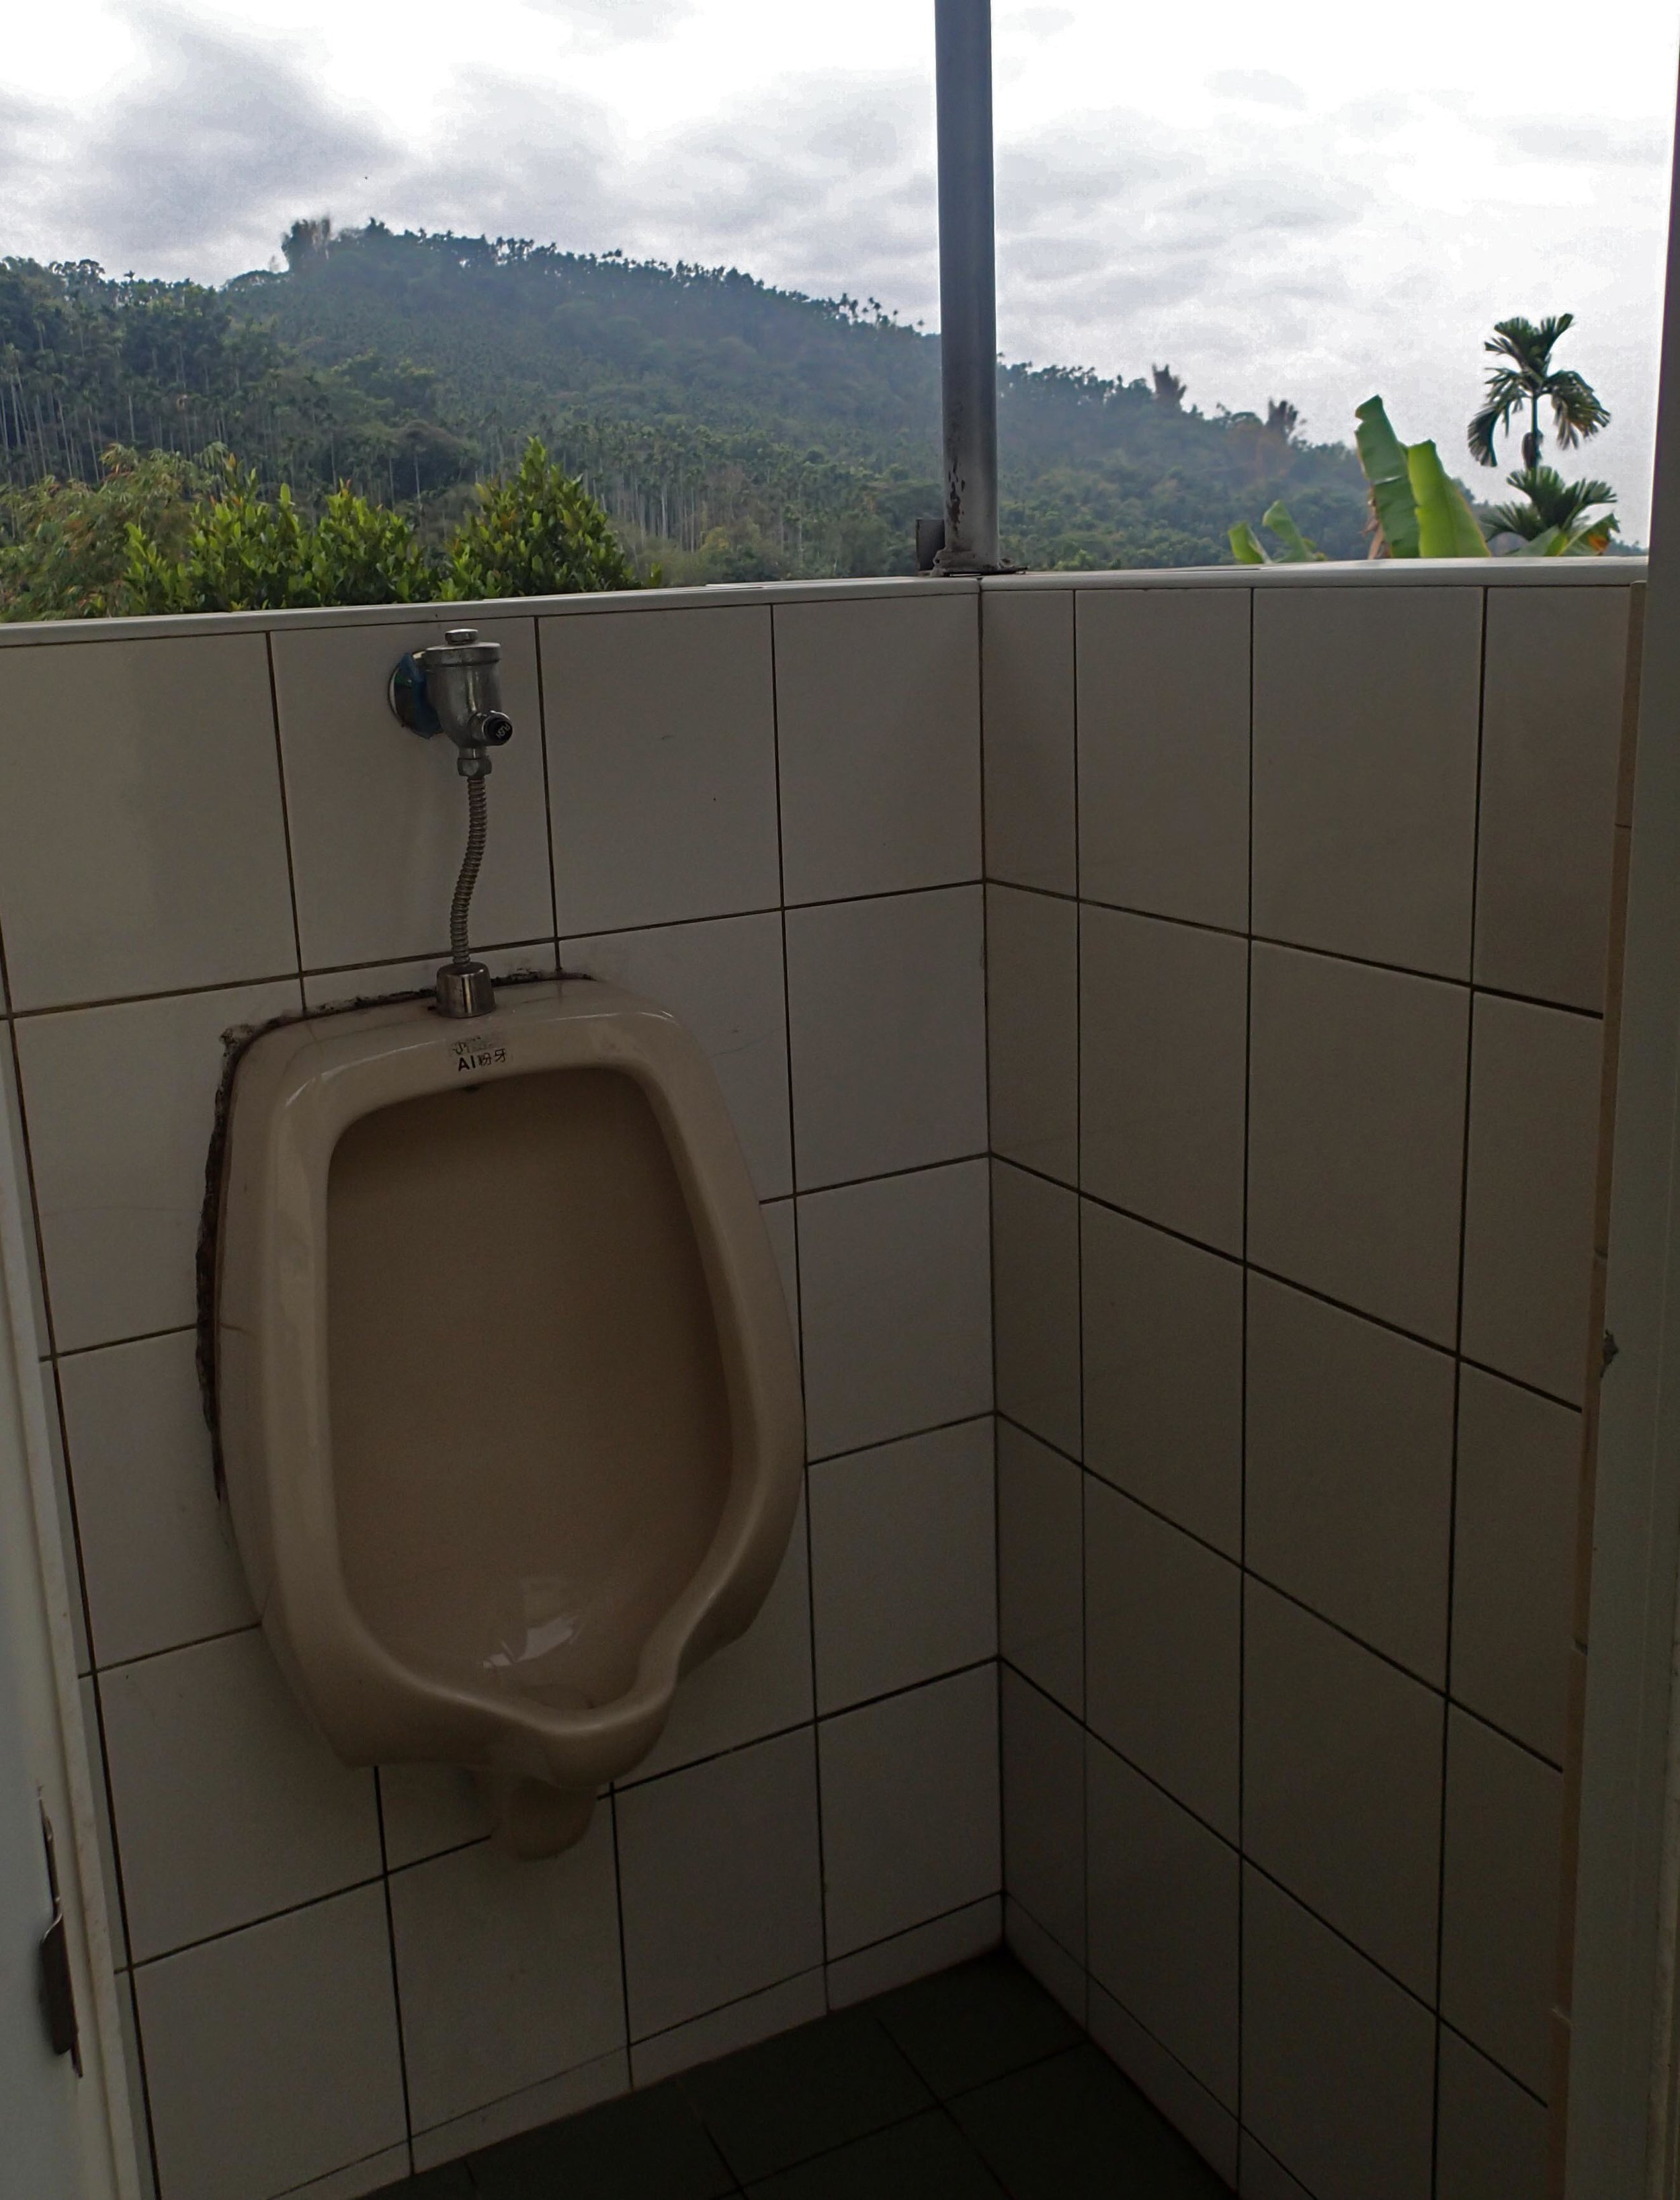 urinal with a view.jpg